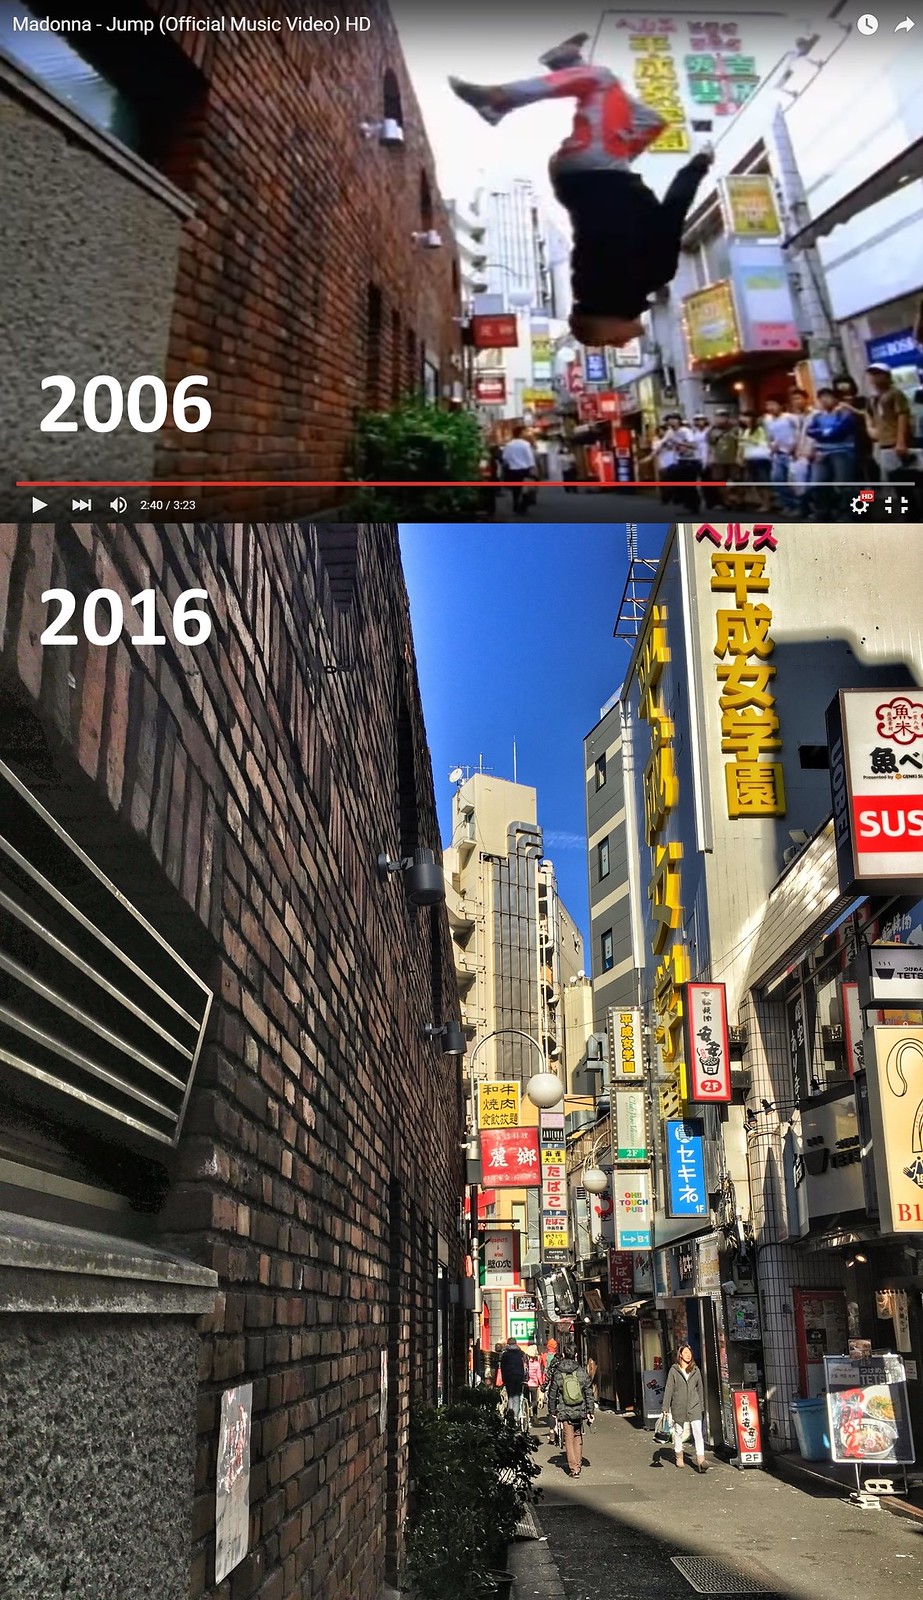 10 Years since Madonna's JUMP: 15 parkour locations of Shibuya